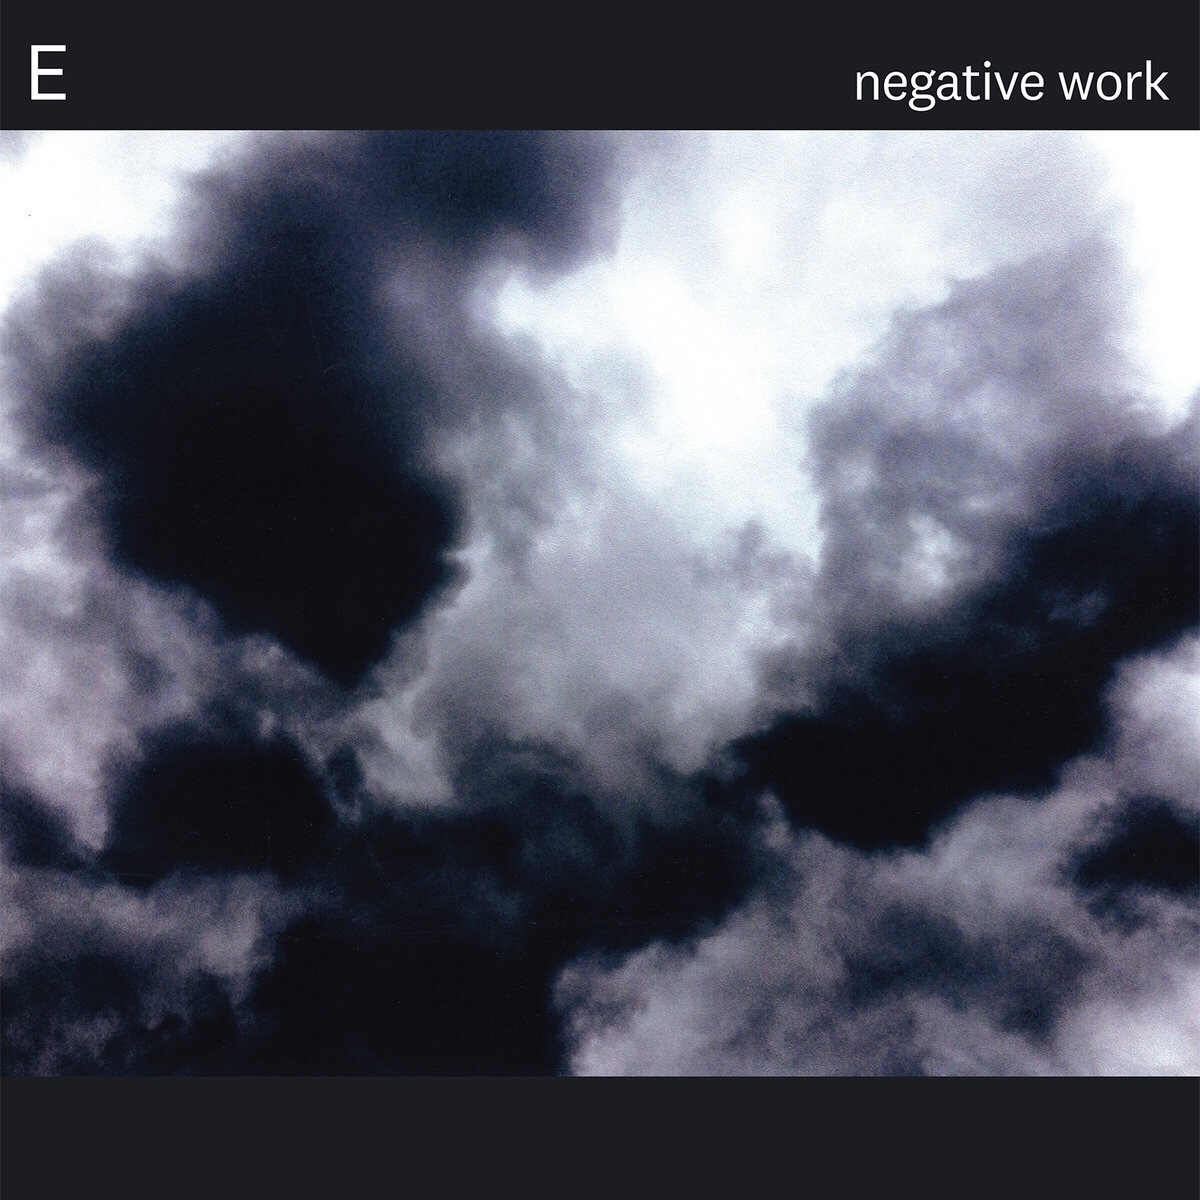 E’s album Negative Work, pictured here in all its glory